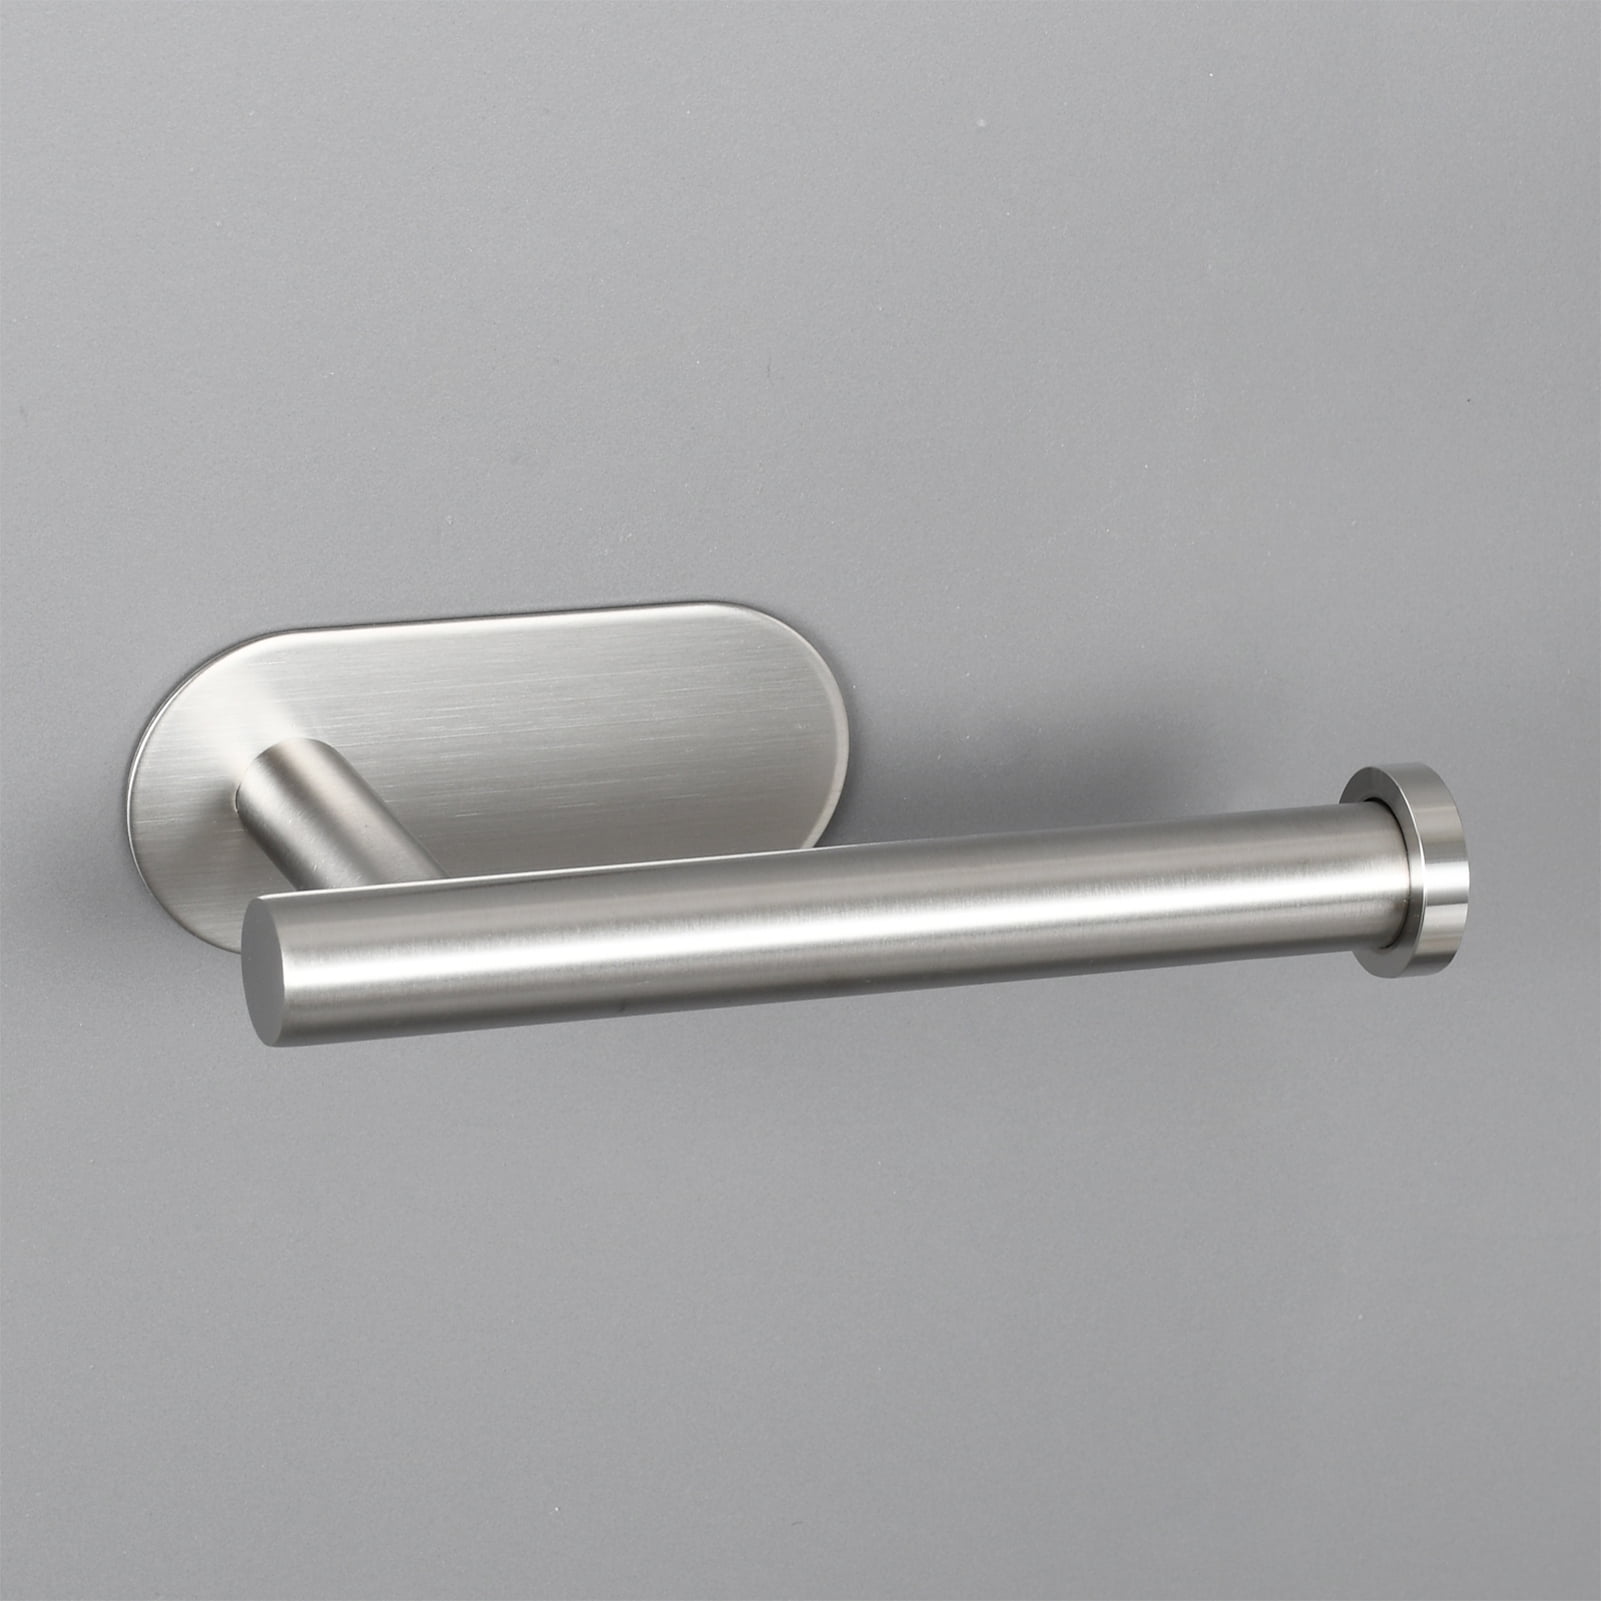 Details about   Self Adhesive Toilet Roll Holder Bar Towel Ring Rail Stainless Steel No Drilling 